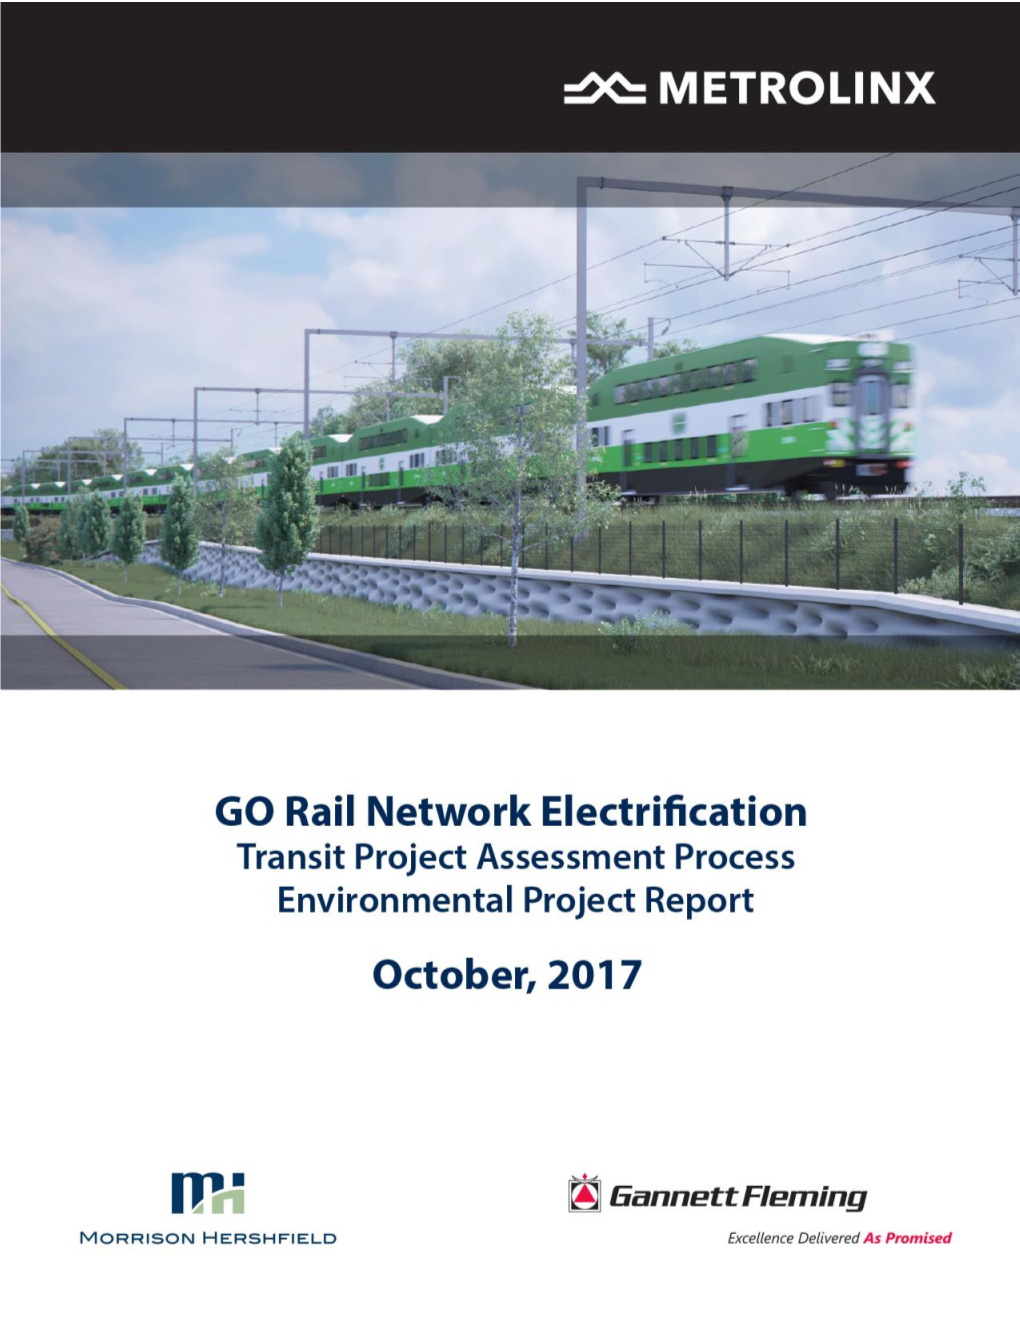 Volume 5 Has Been Updated to Reflect the Specific Additions/Revisions Outlined in the Errata to the Environmental Project Report, Dated November, 2017